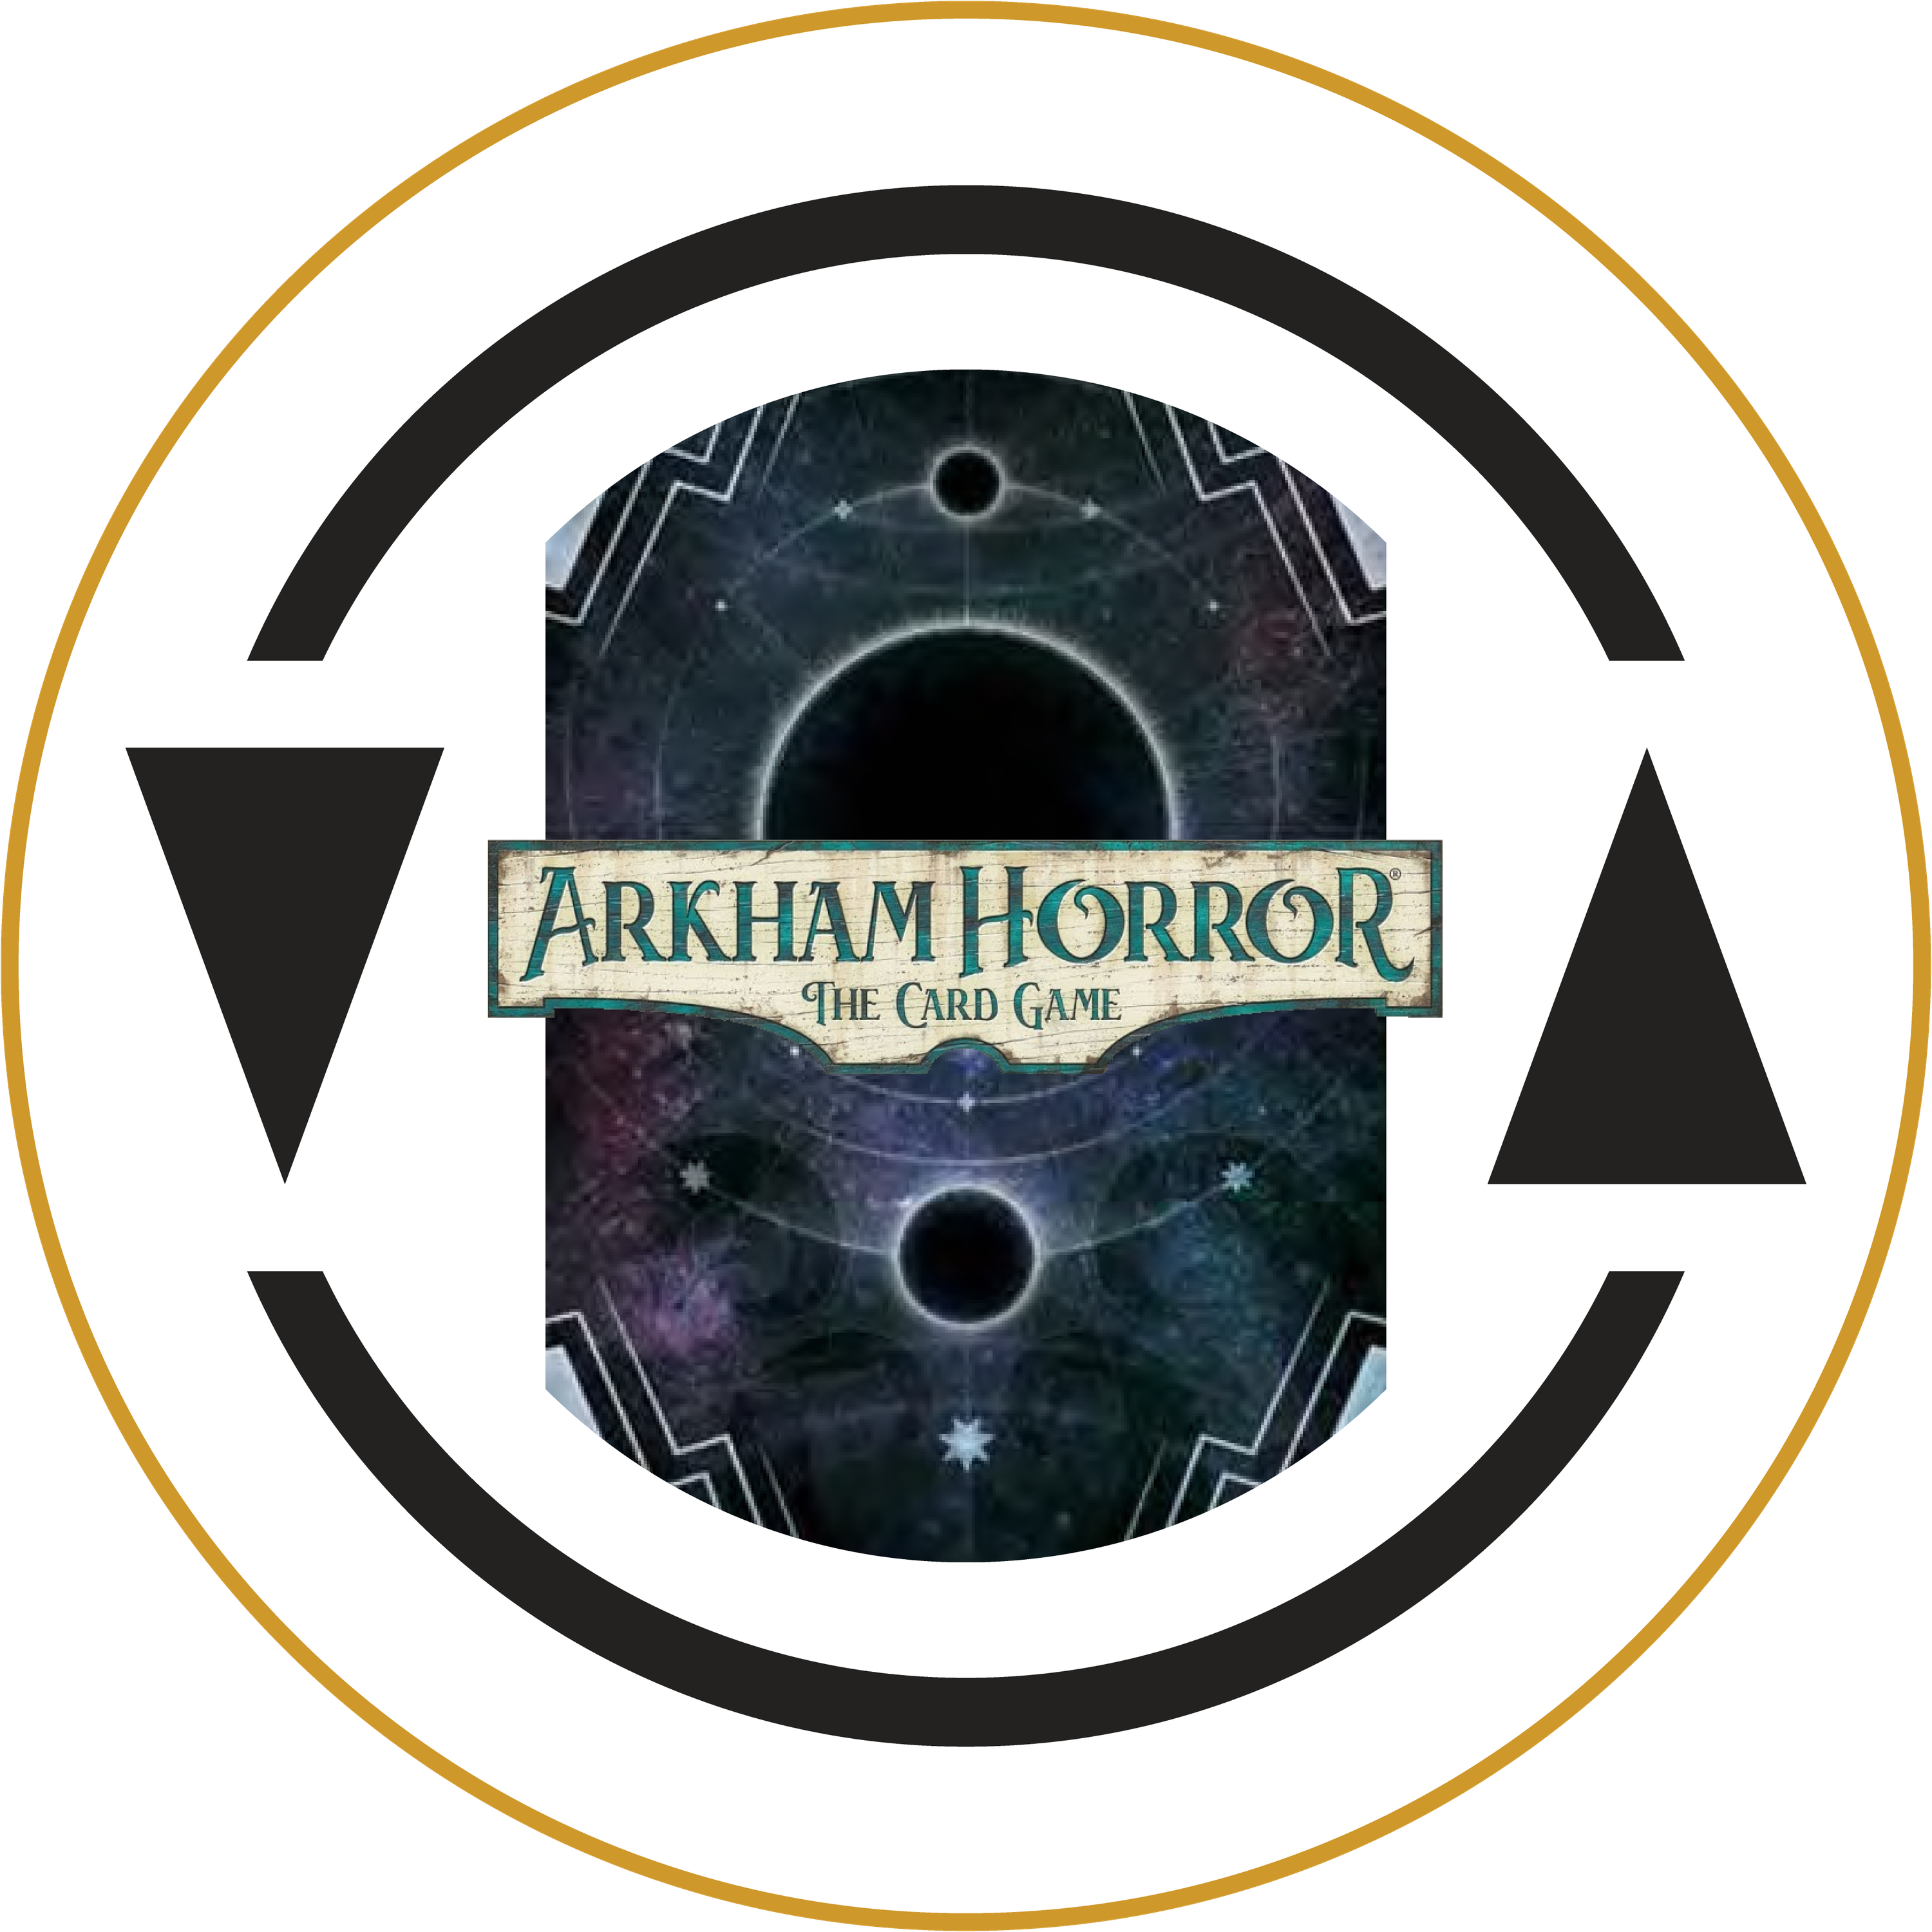 Arkham Horror: The Card Game Supplement Subscription